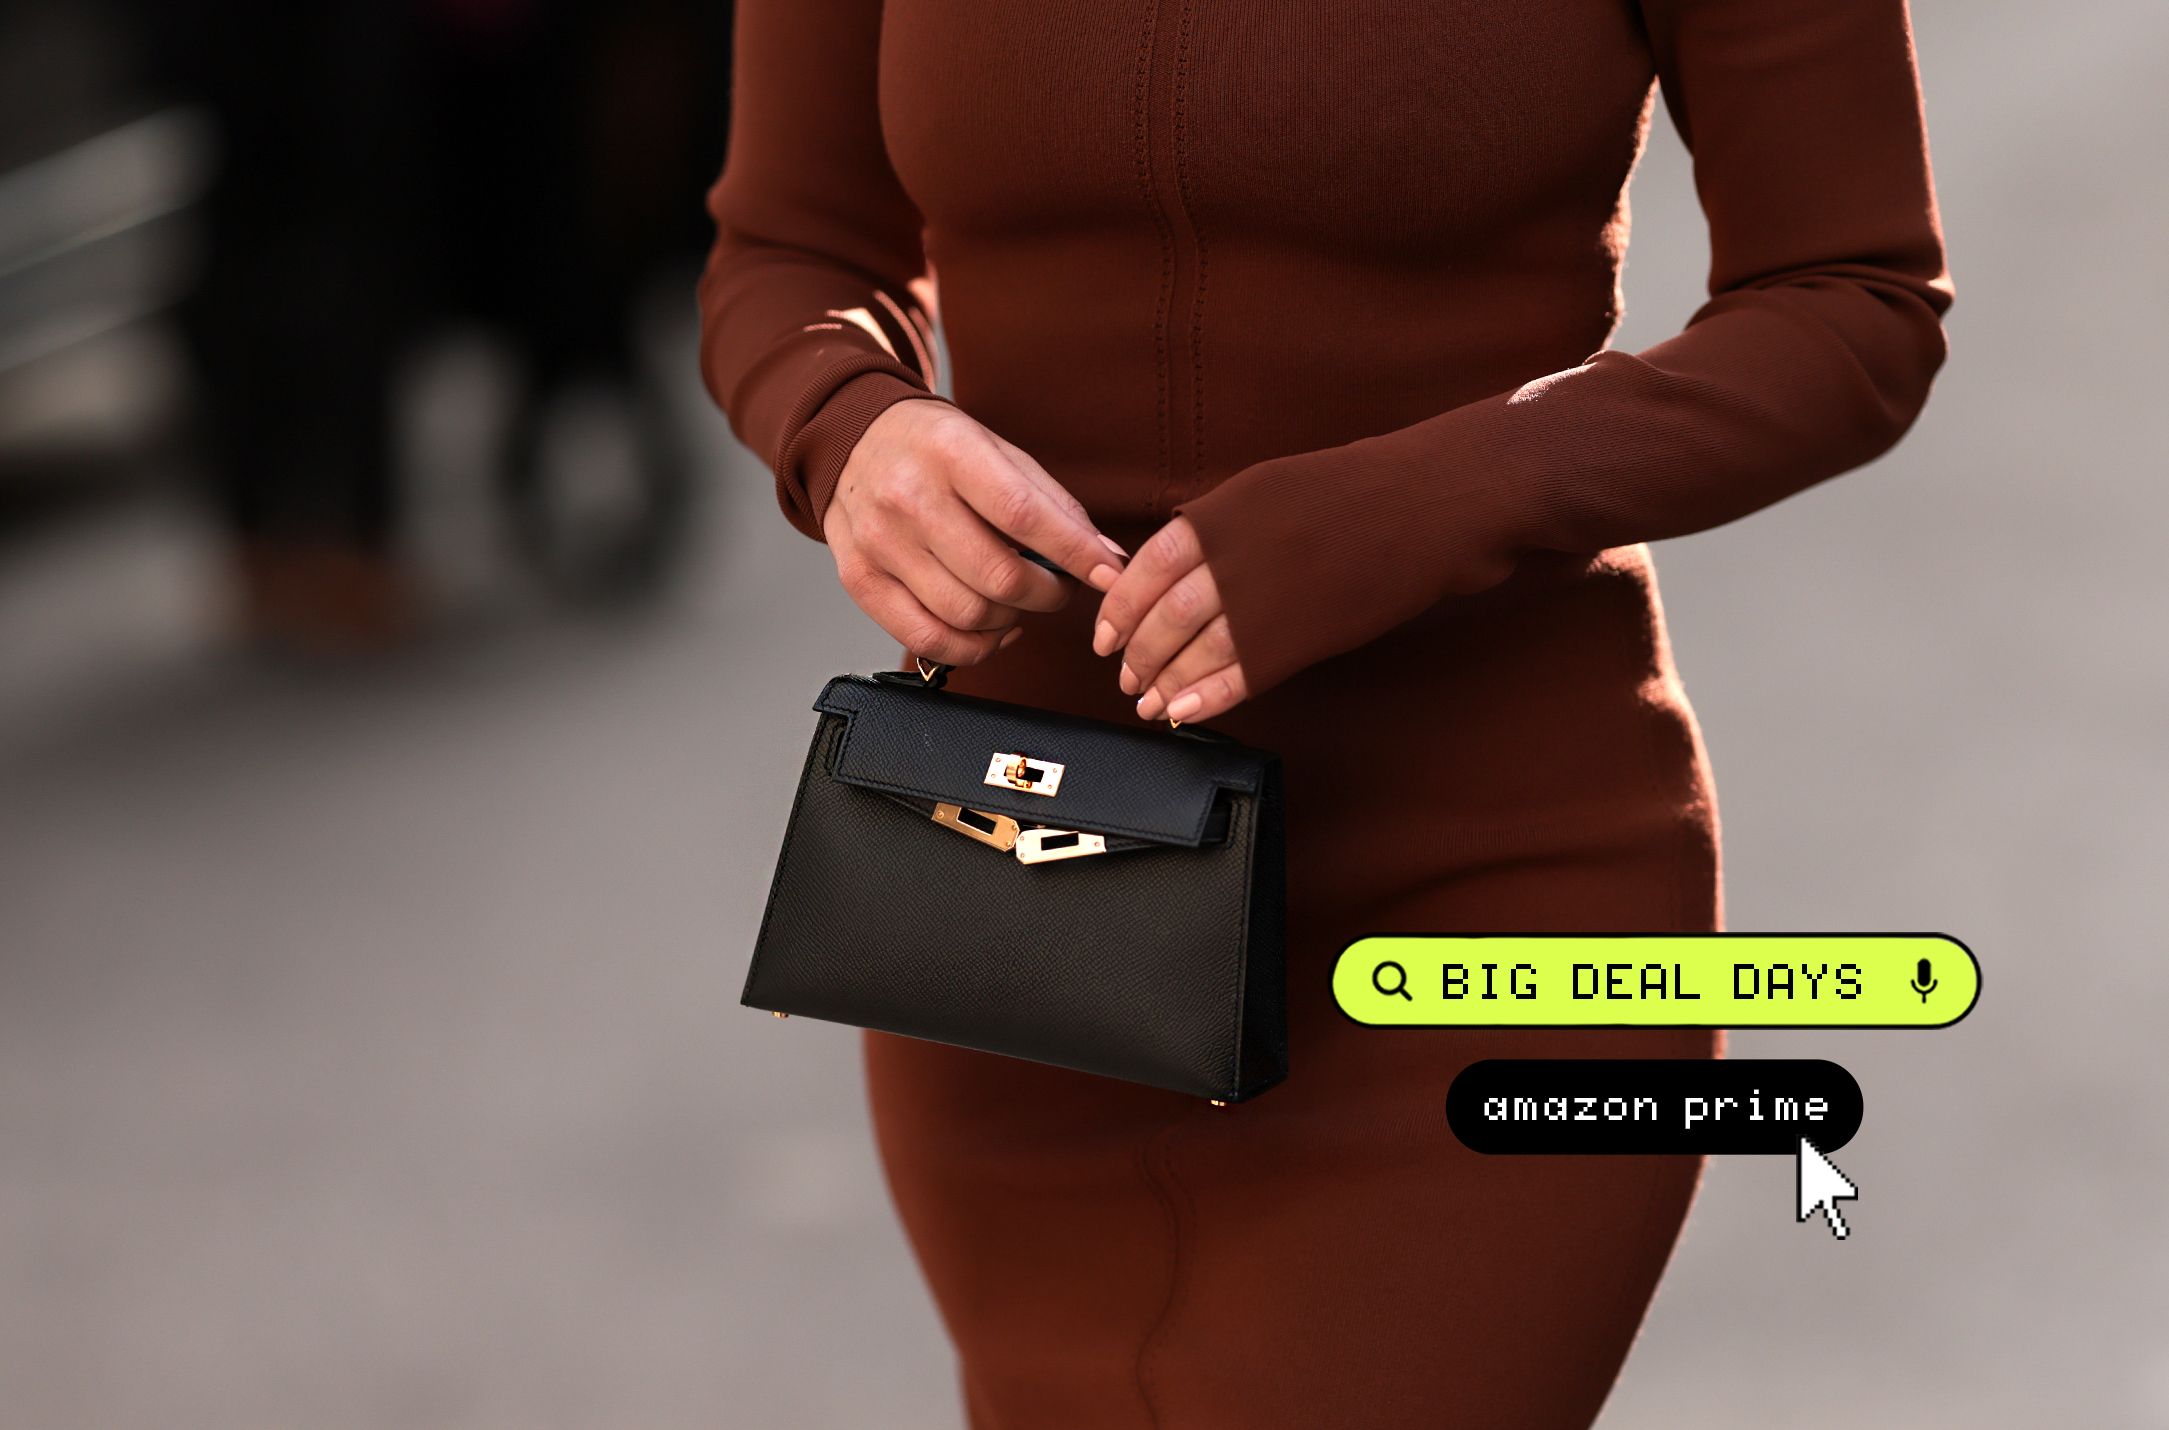 JW Pei Bags: Buy the Latest Supermodel Approved It-Bag During  Prime  Day